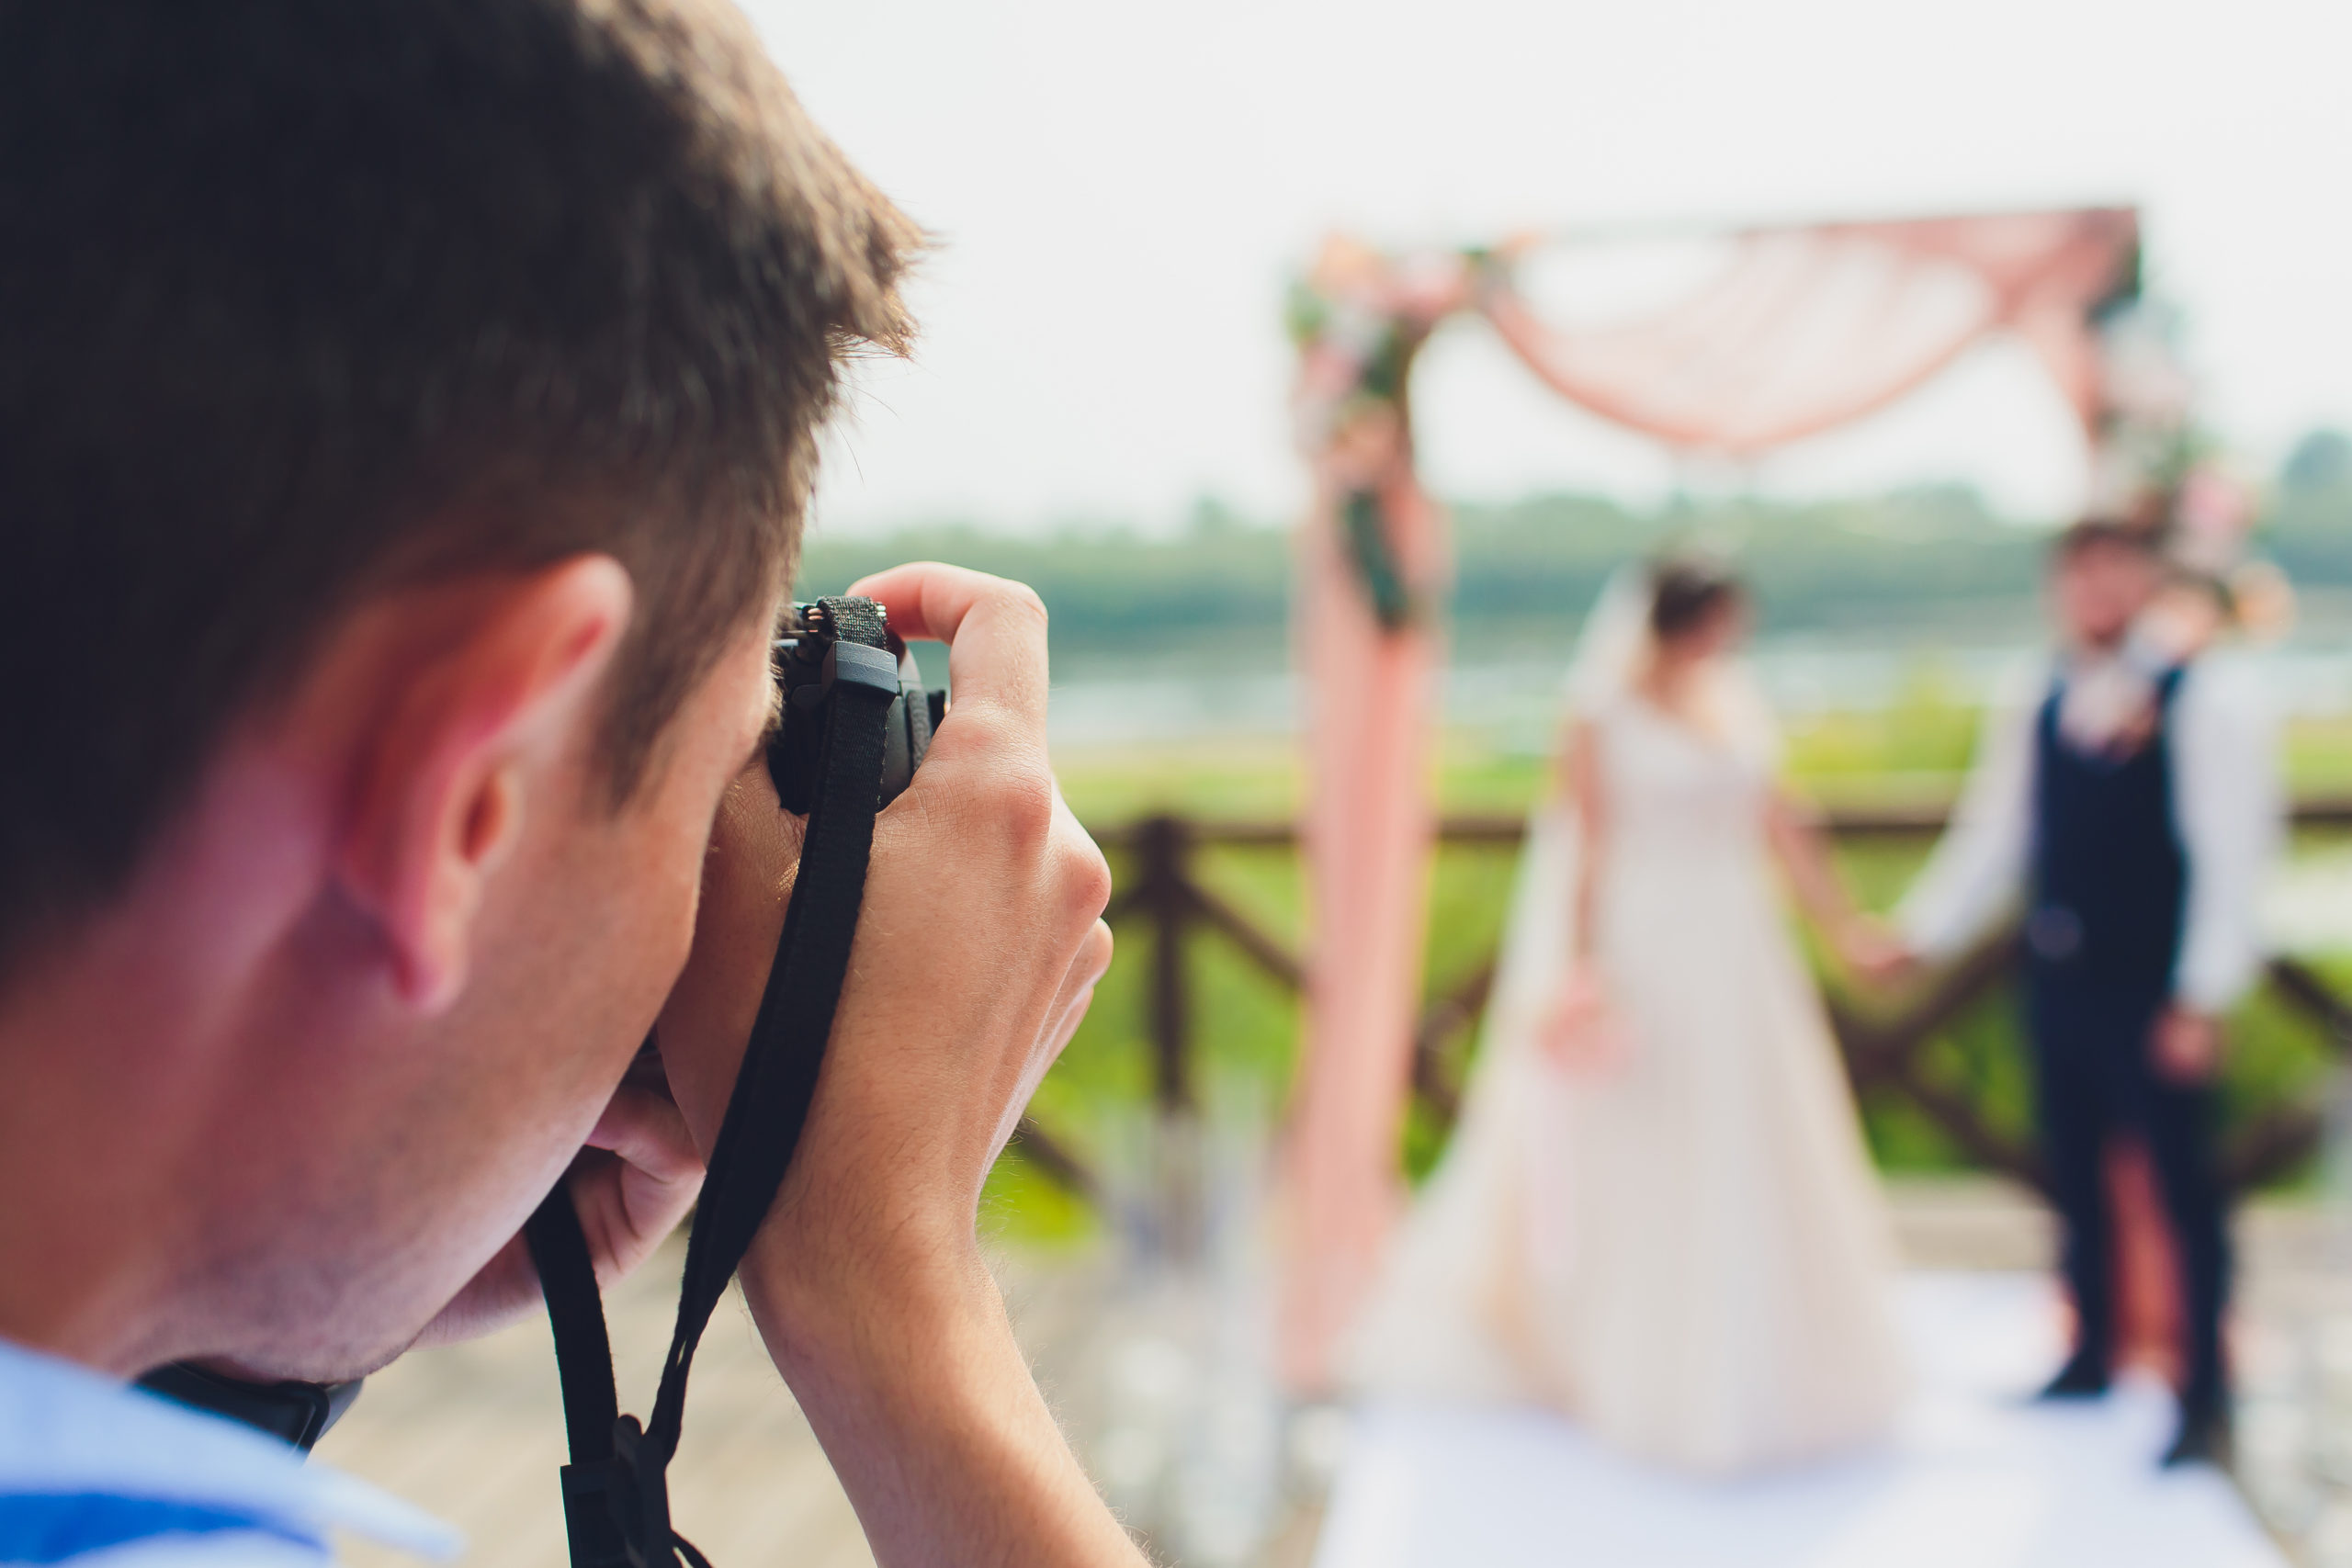 Wedding Photographer Takes Pictures Of Bride And Groom In City Wedding Couple On Photo Shoot